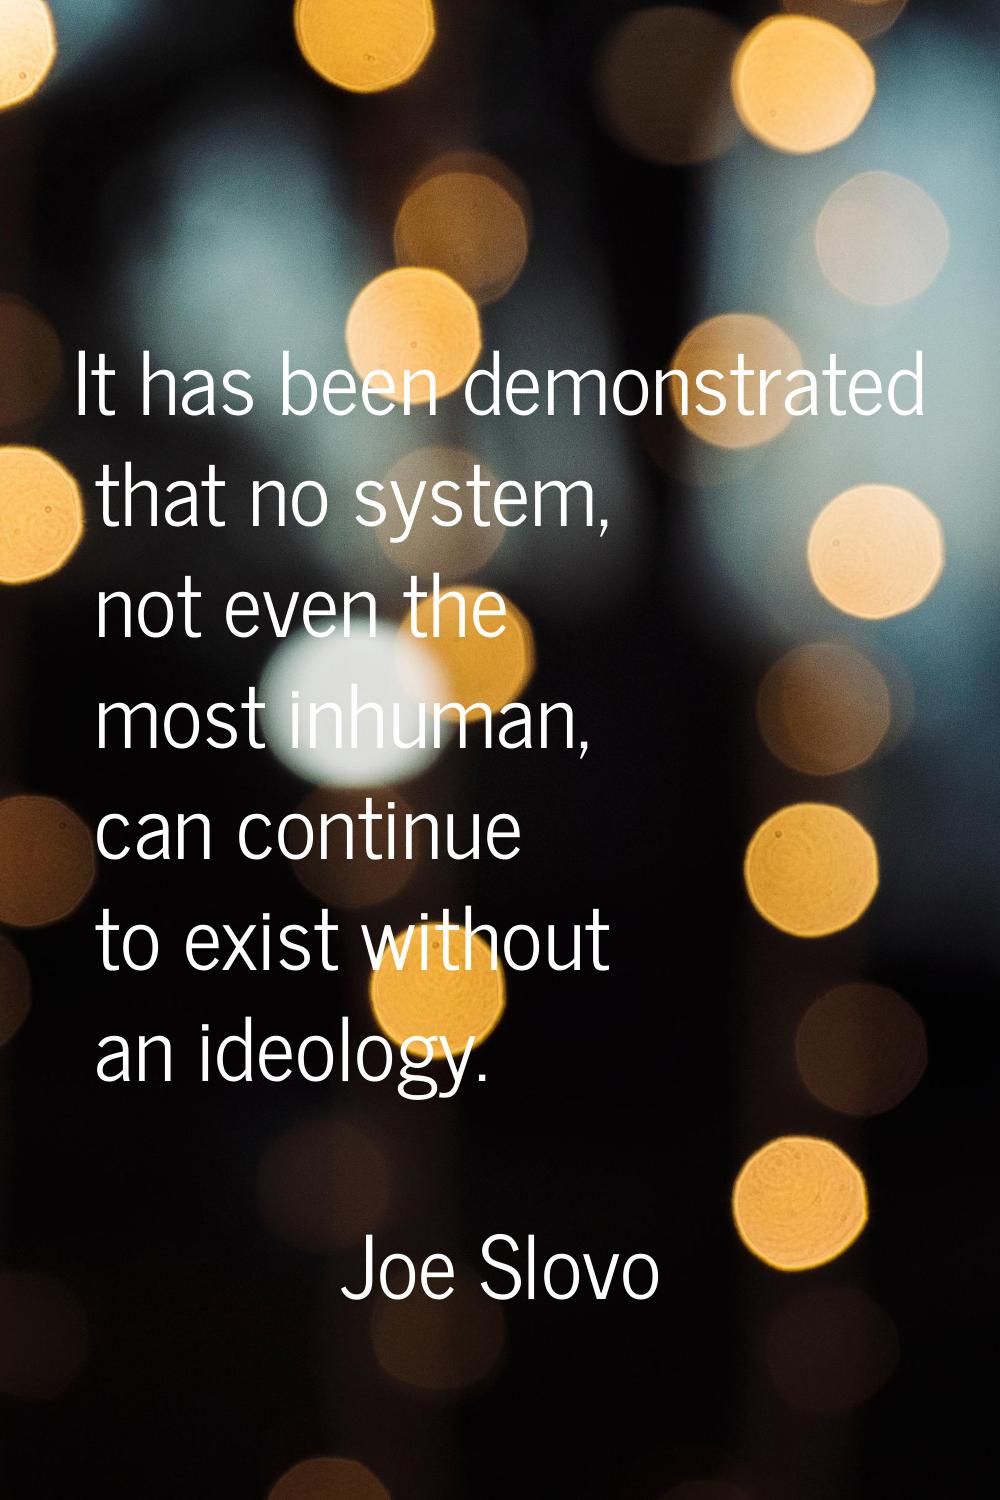 It has been demonstrated that no system, not even the most inhuman, can continue to exist without a